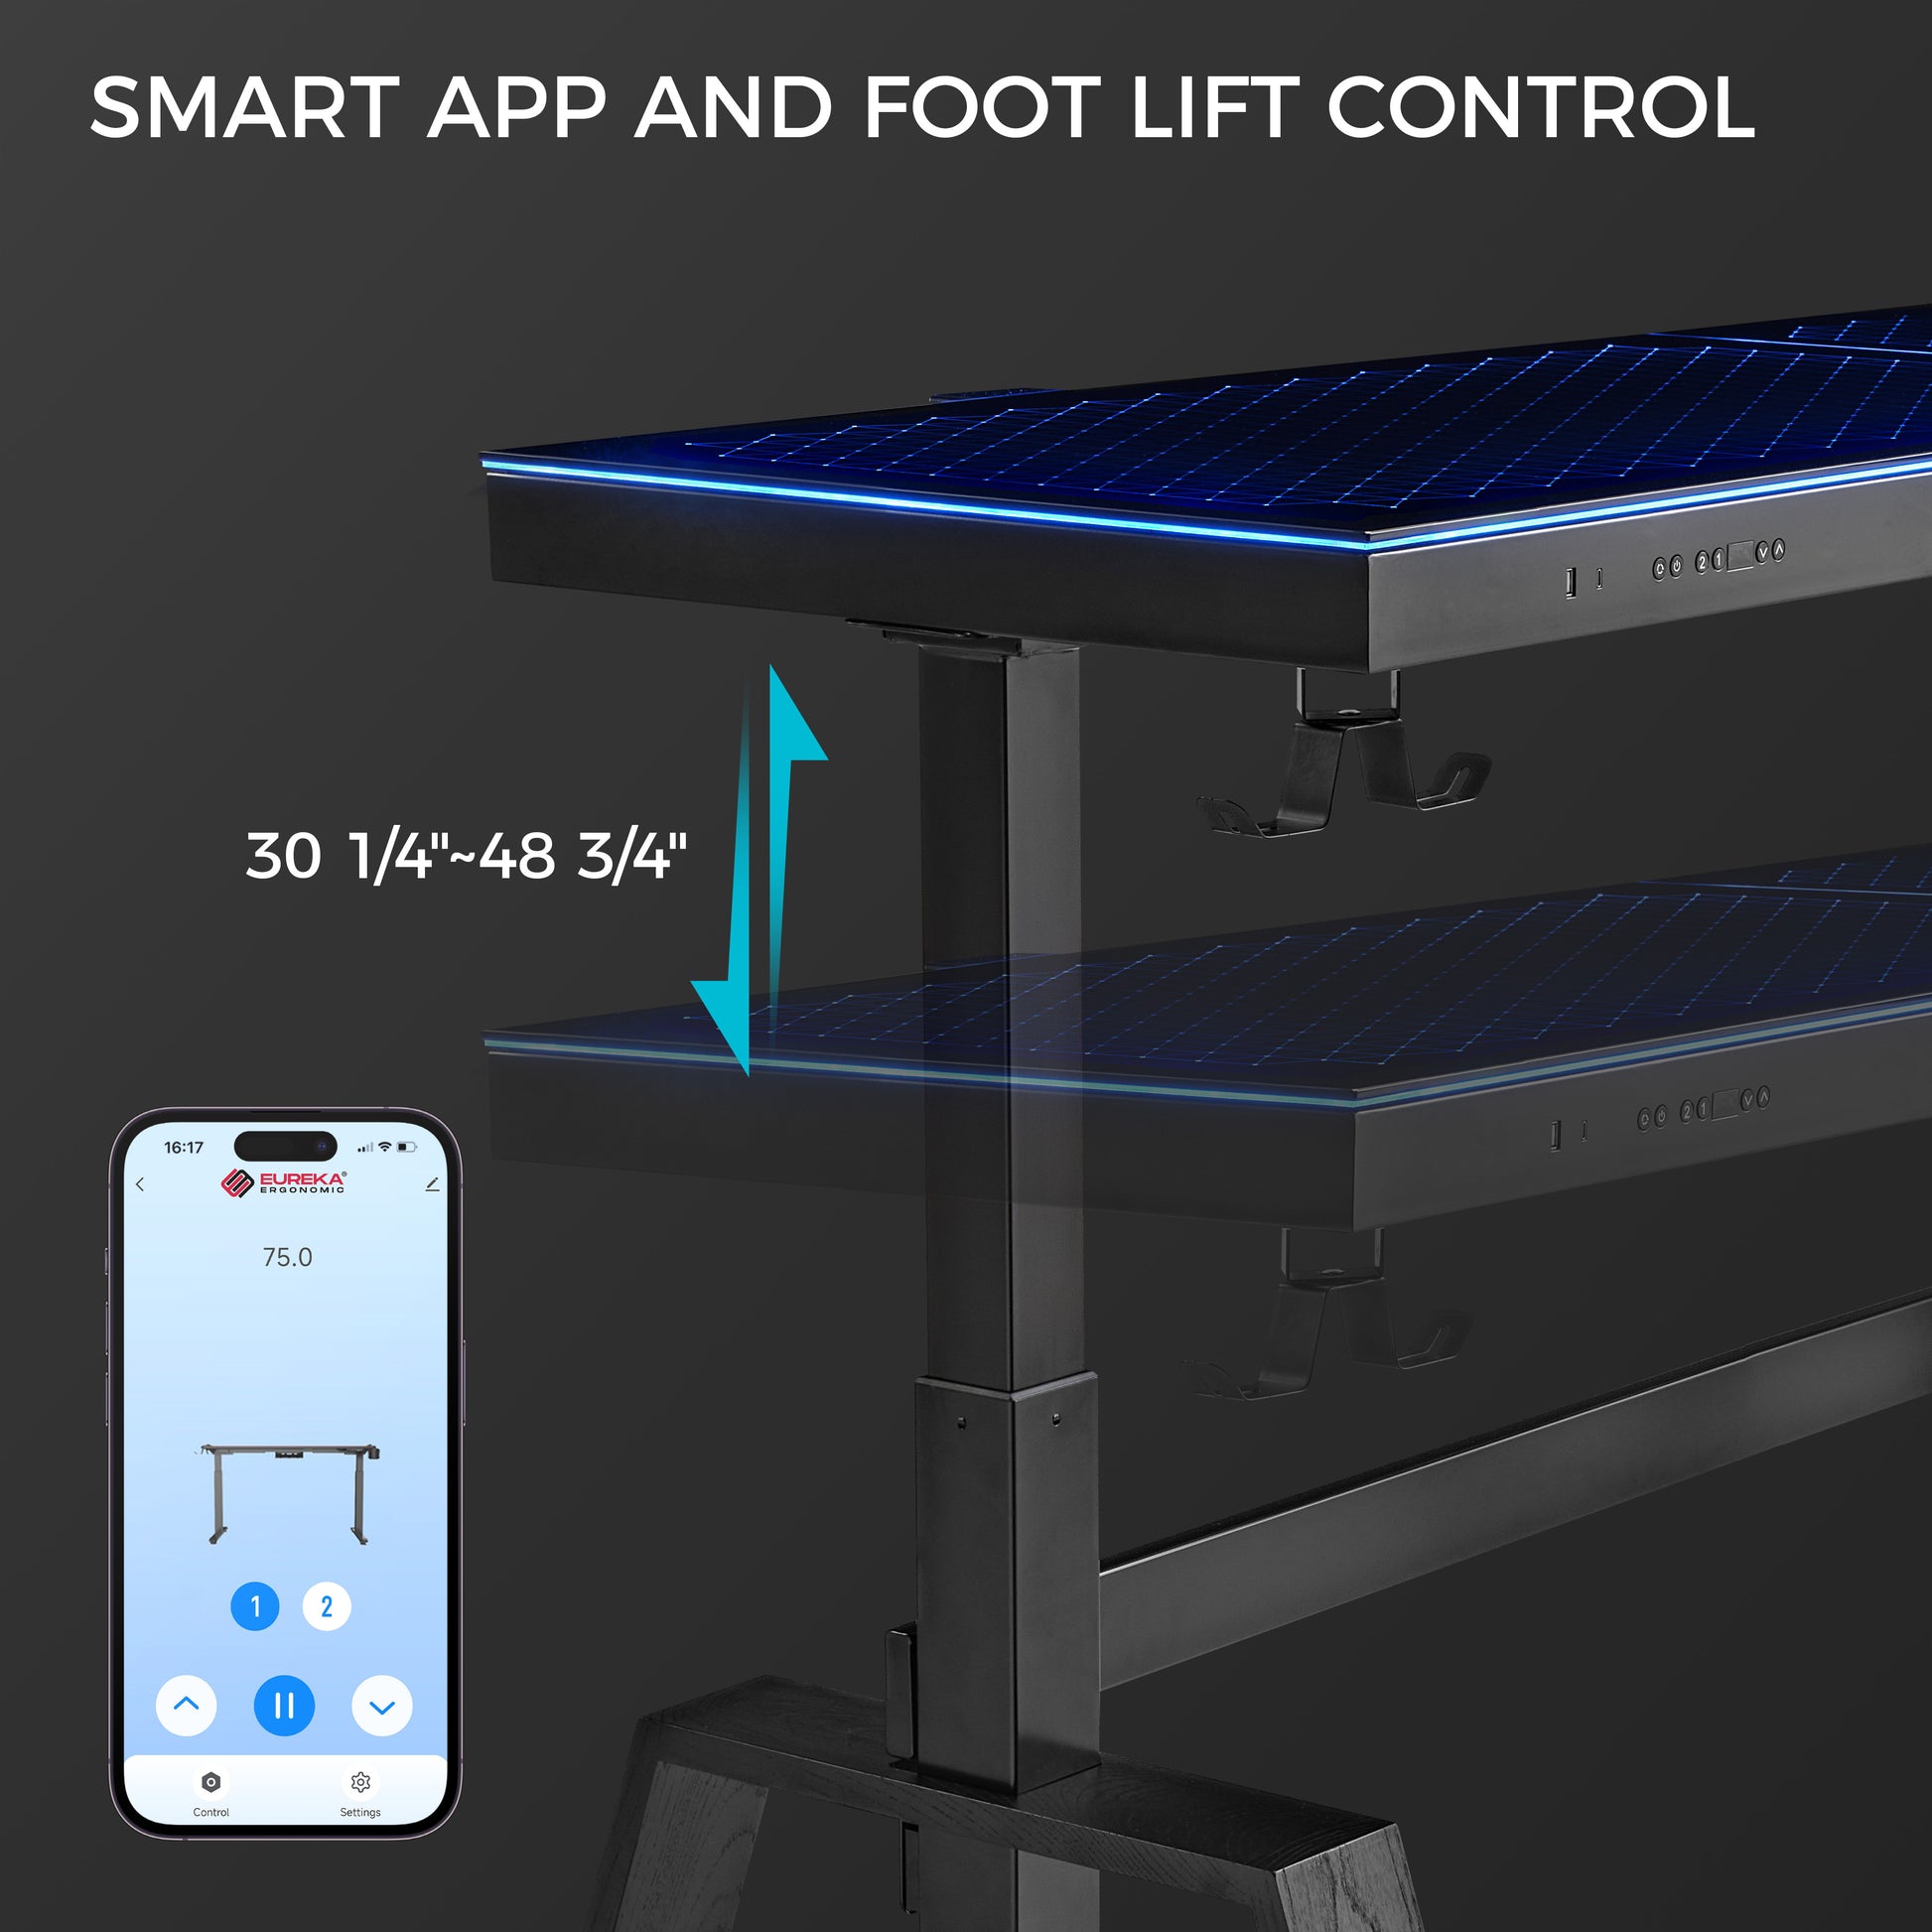 GTG-L60 PRO, L-Shaped Glass Desktop Gaming Standing Desk, Black-colored, RGB Light Up Gaming Desk, Glass Top, App Connected 30 inches to 48 inches